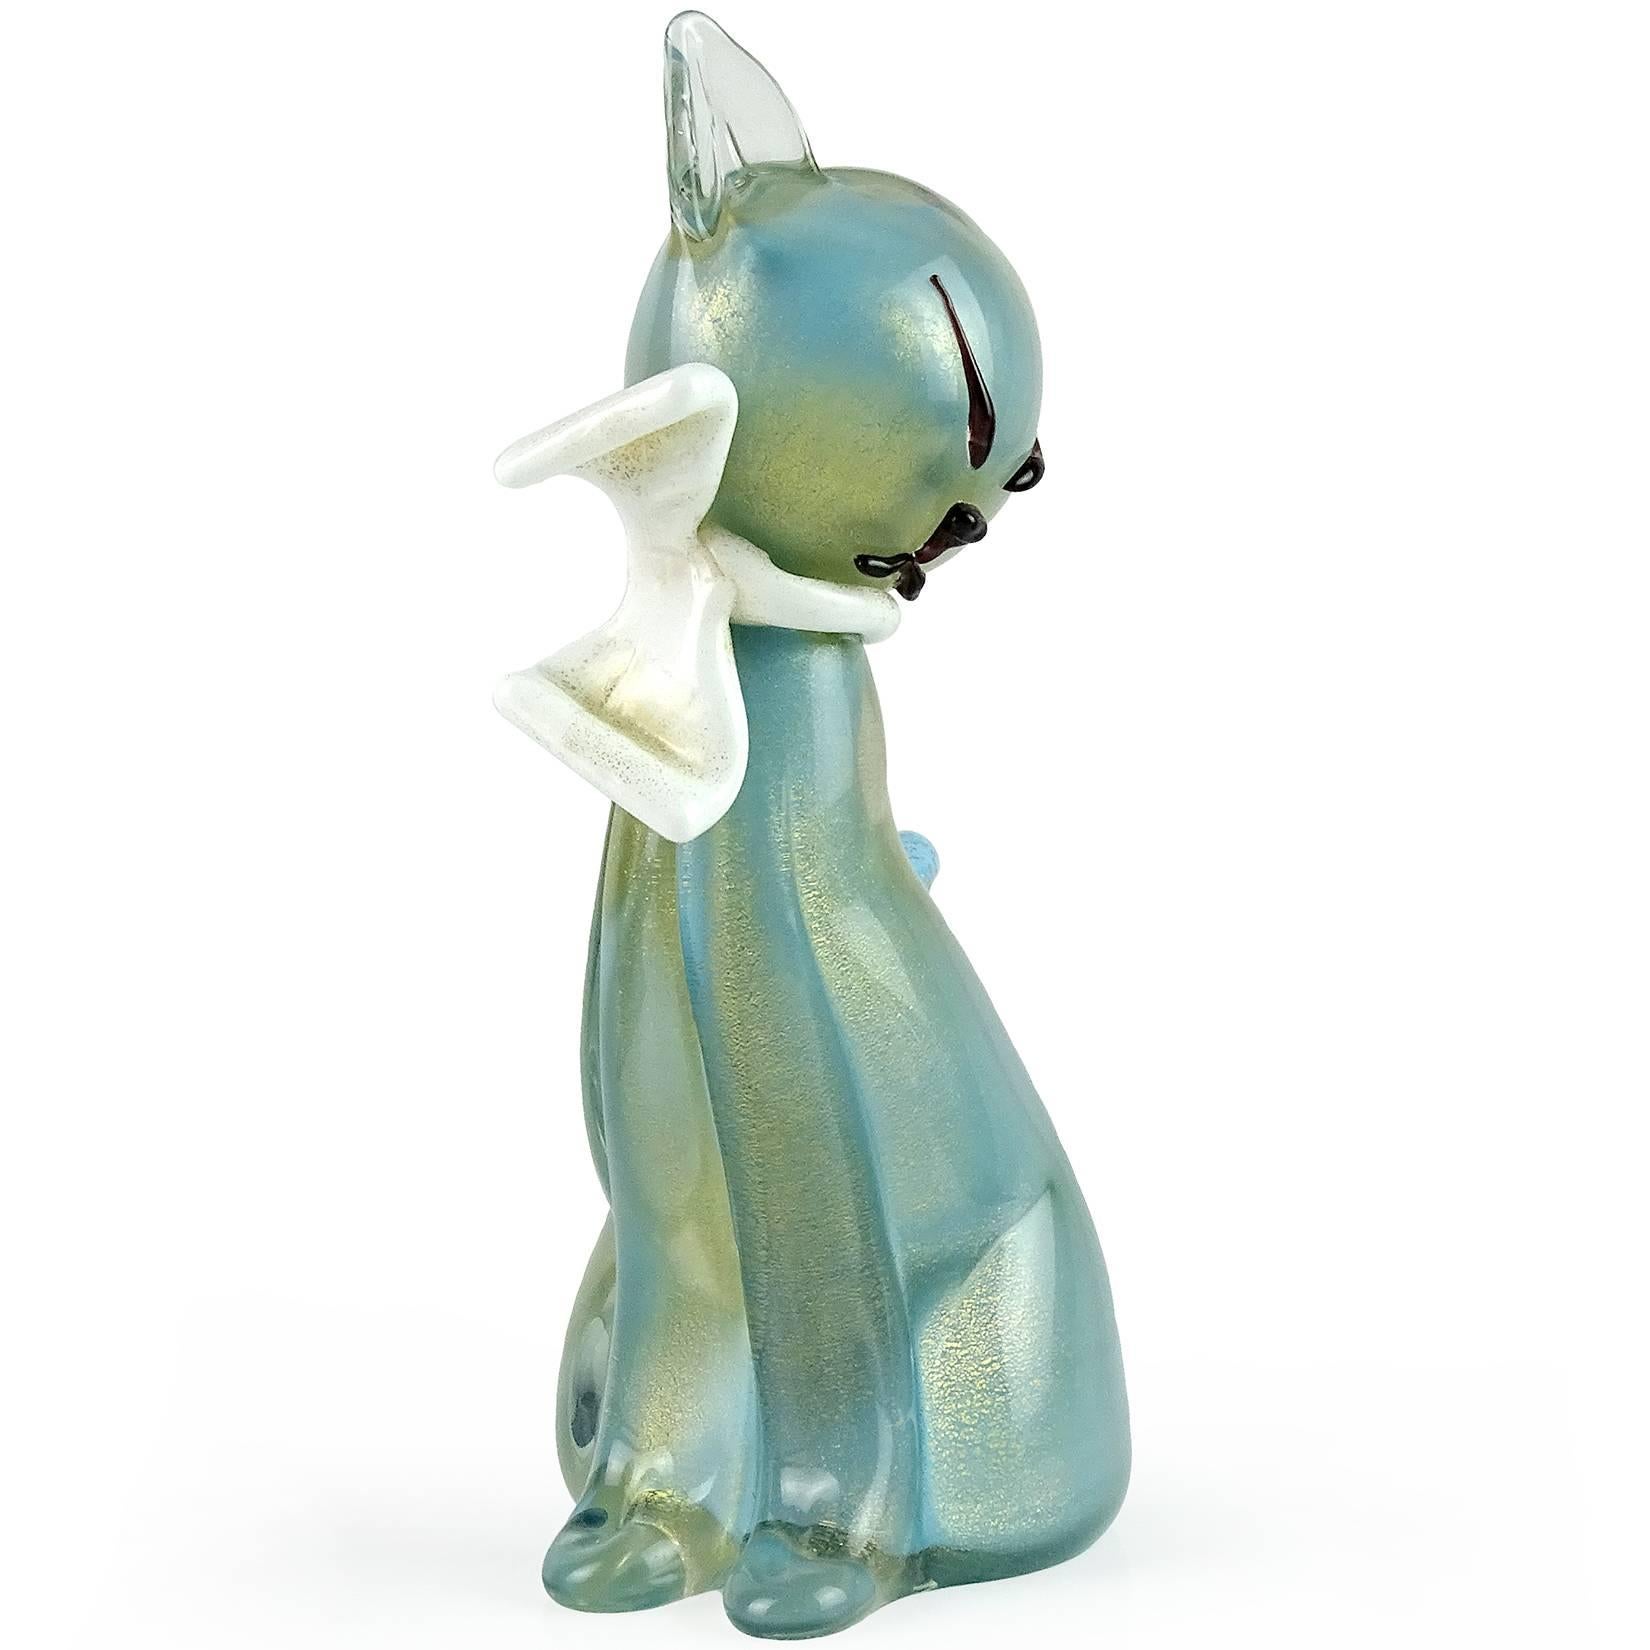 Gorgeous Murano handblown blue and gold flecks Italian art glass cat figurine or sculpture with white bow. Documented to designer Alfredo Barbini, circa 1950s. It is published in his catalog. The kitten has a very elegant shape, with black accents